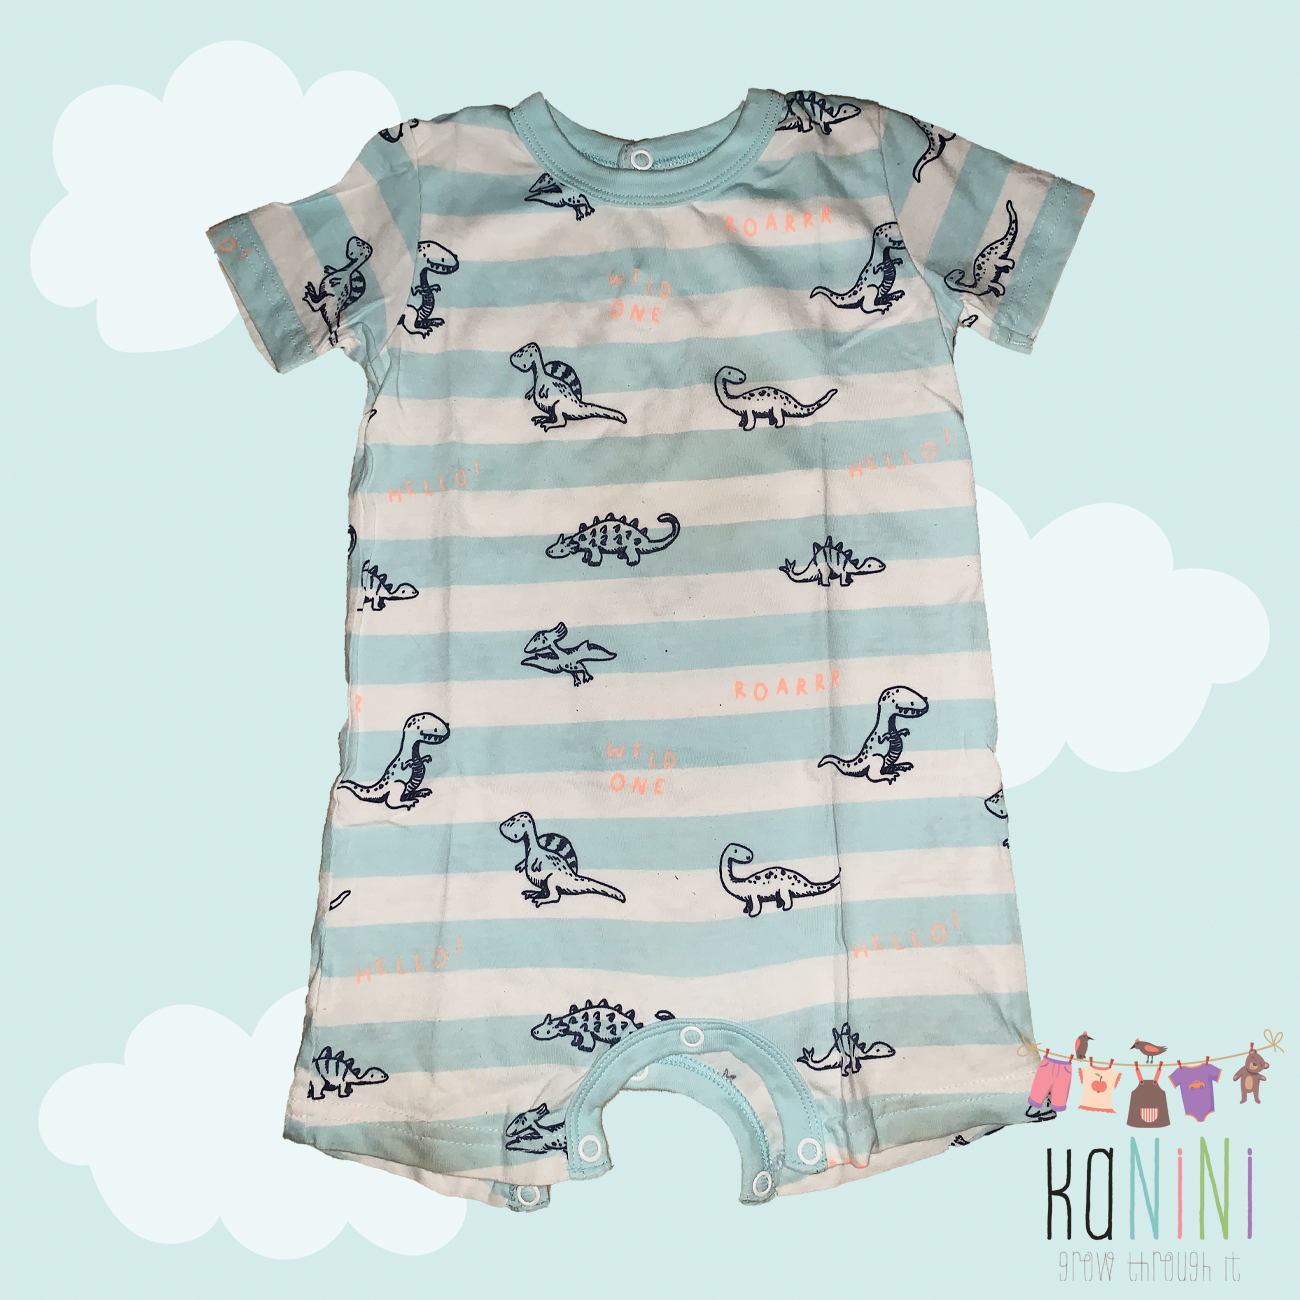 Featured image for “Woolworths 6 - 12 Months Boys Striped Romper”